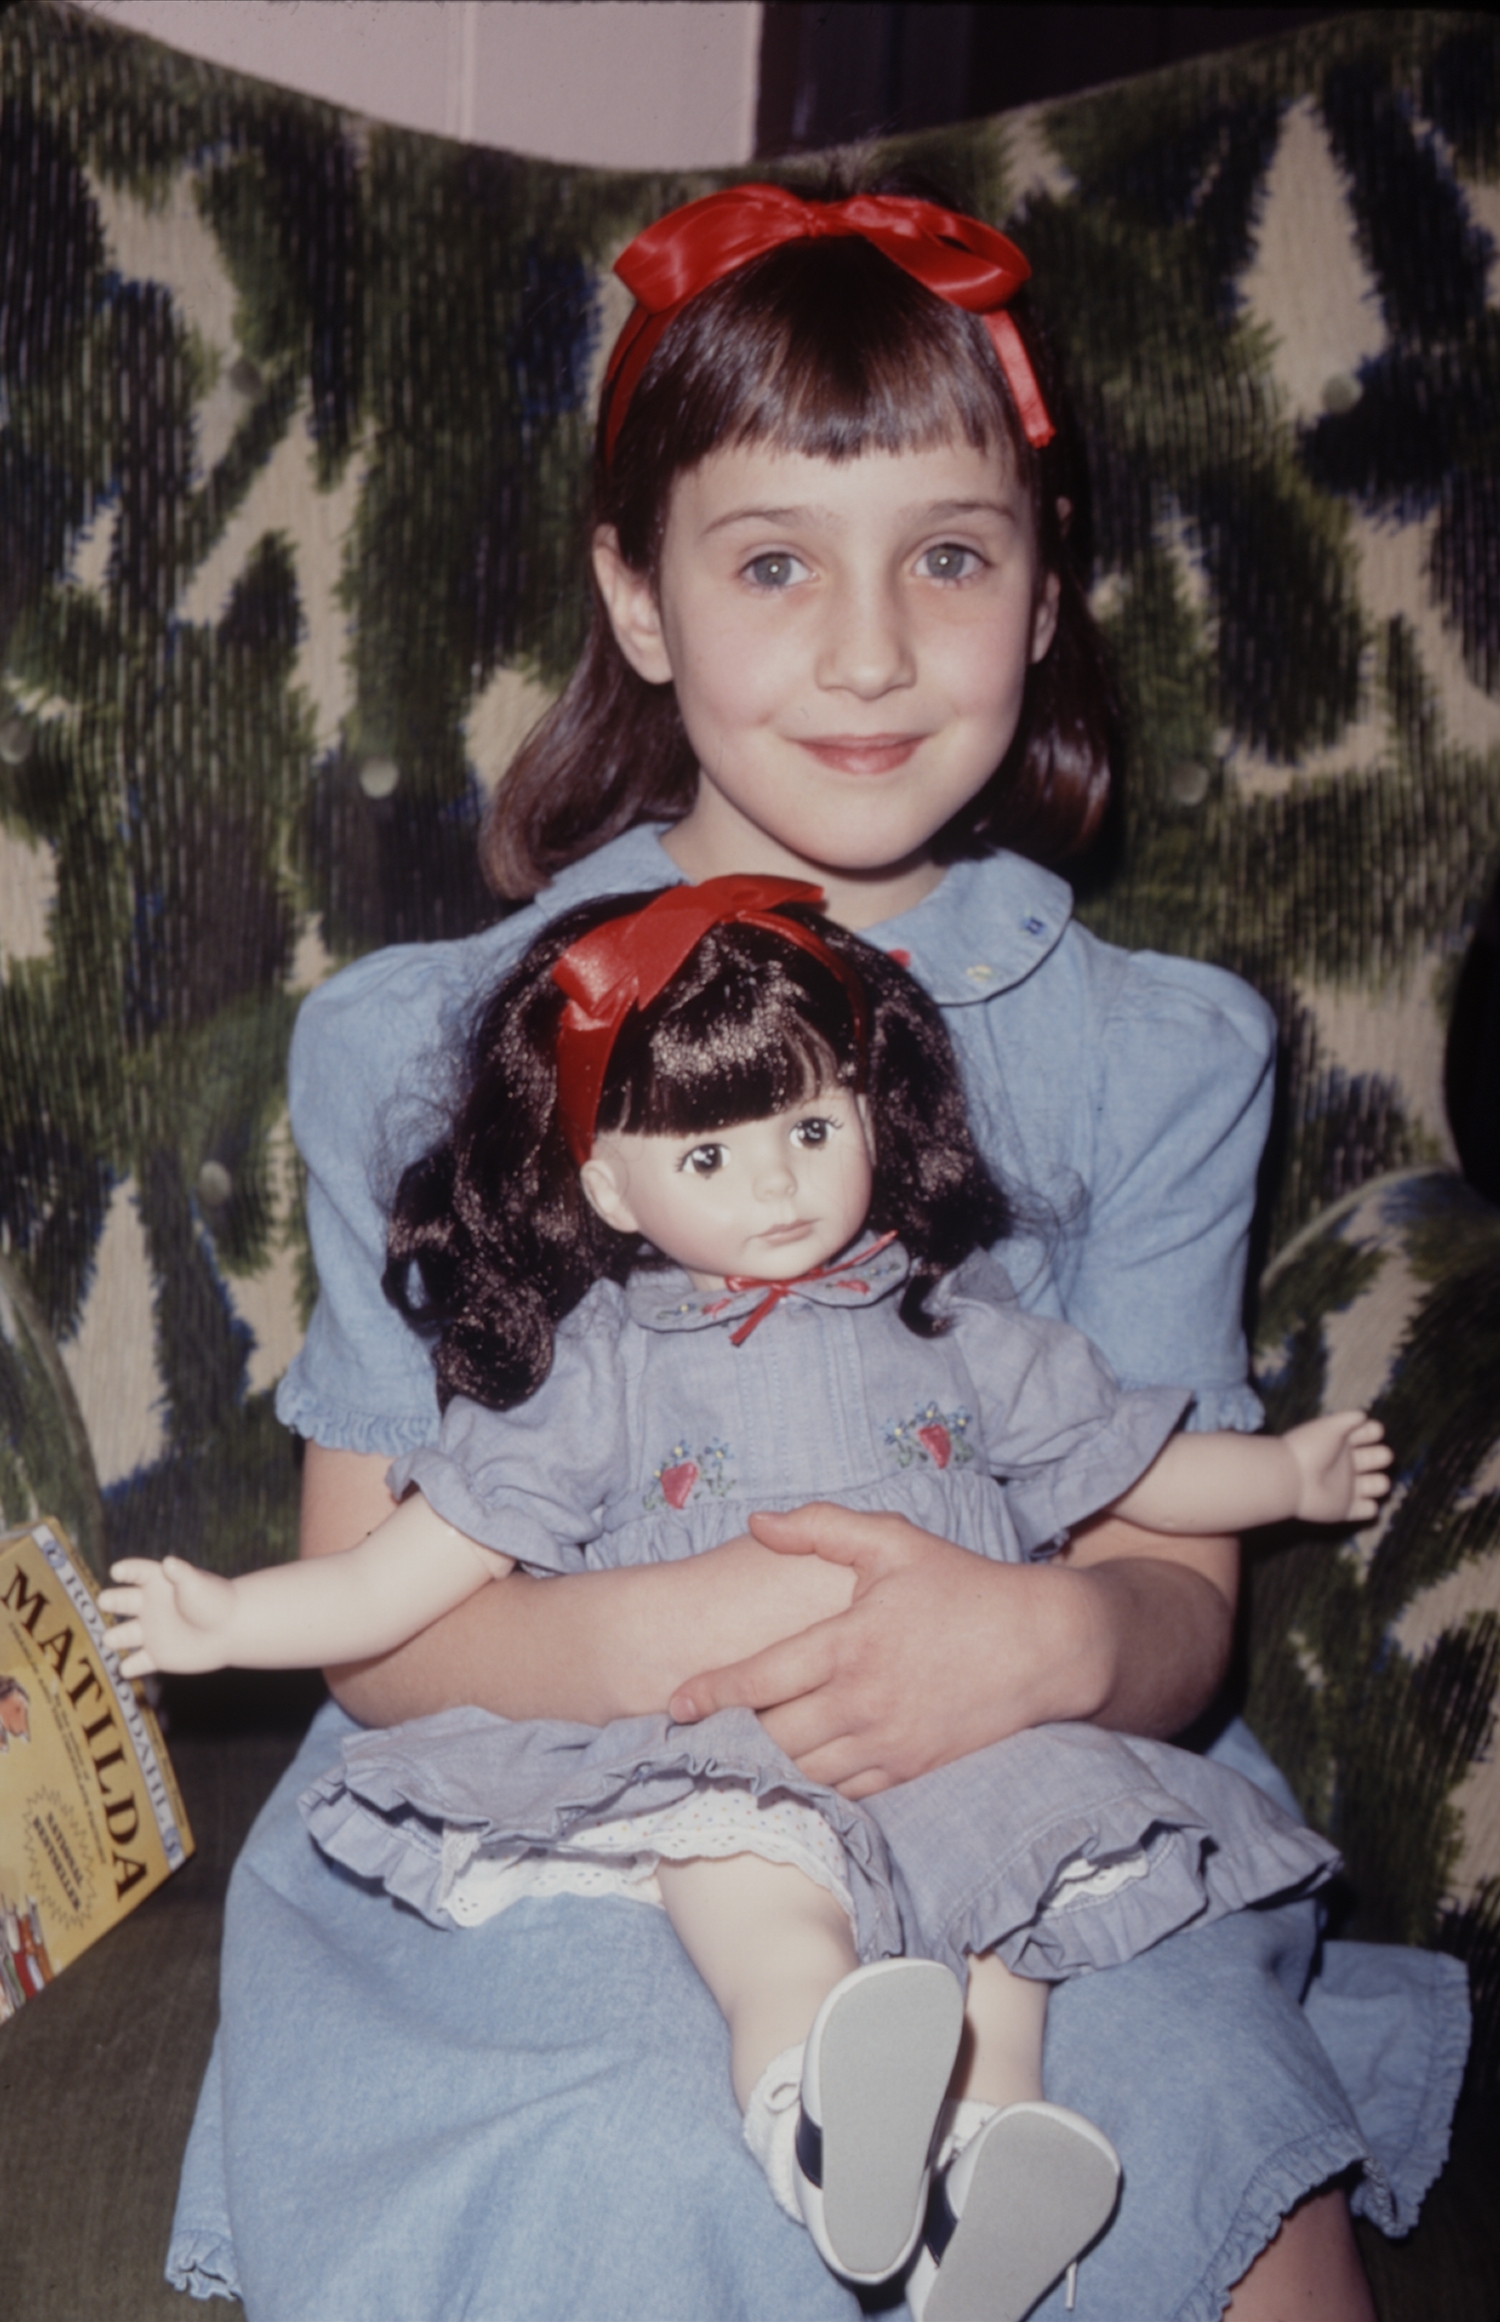 An undated image of Mara Wilson. | Source: Getty Images